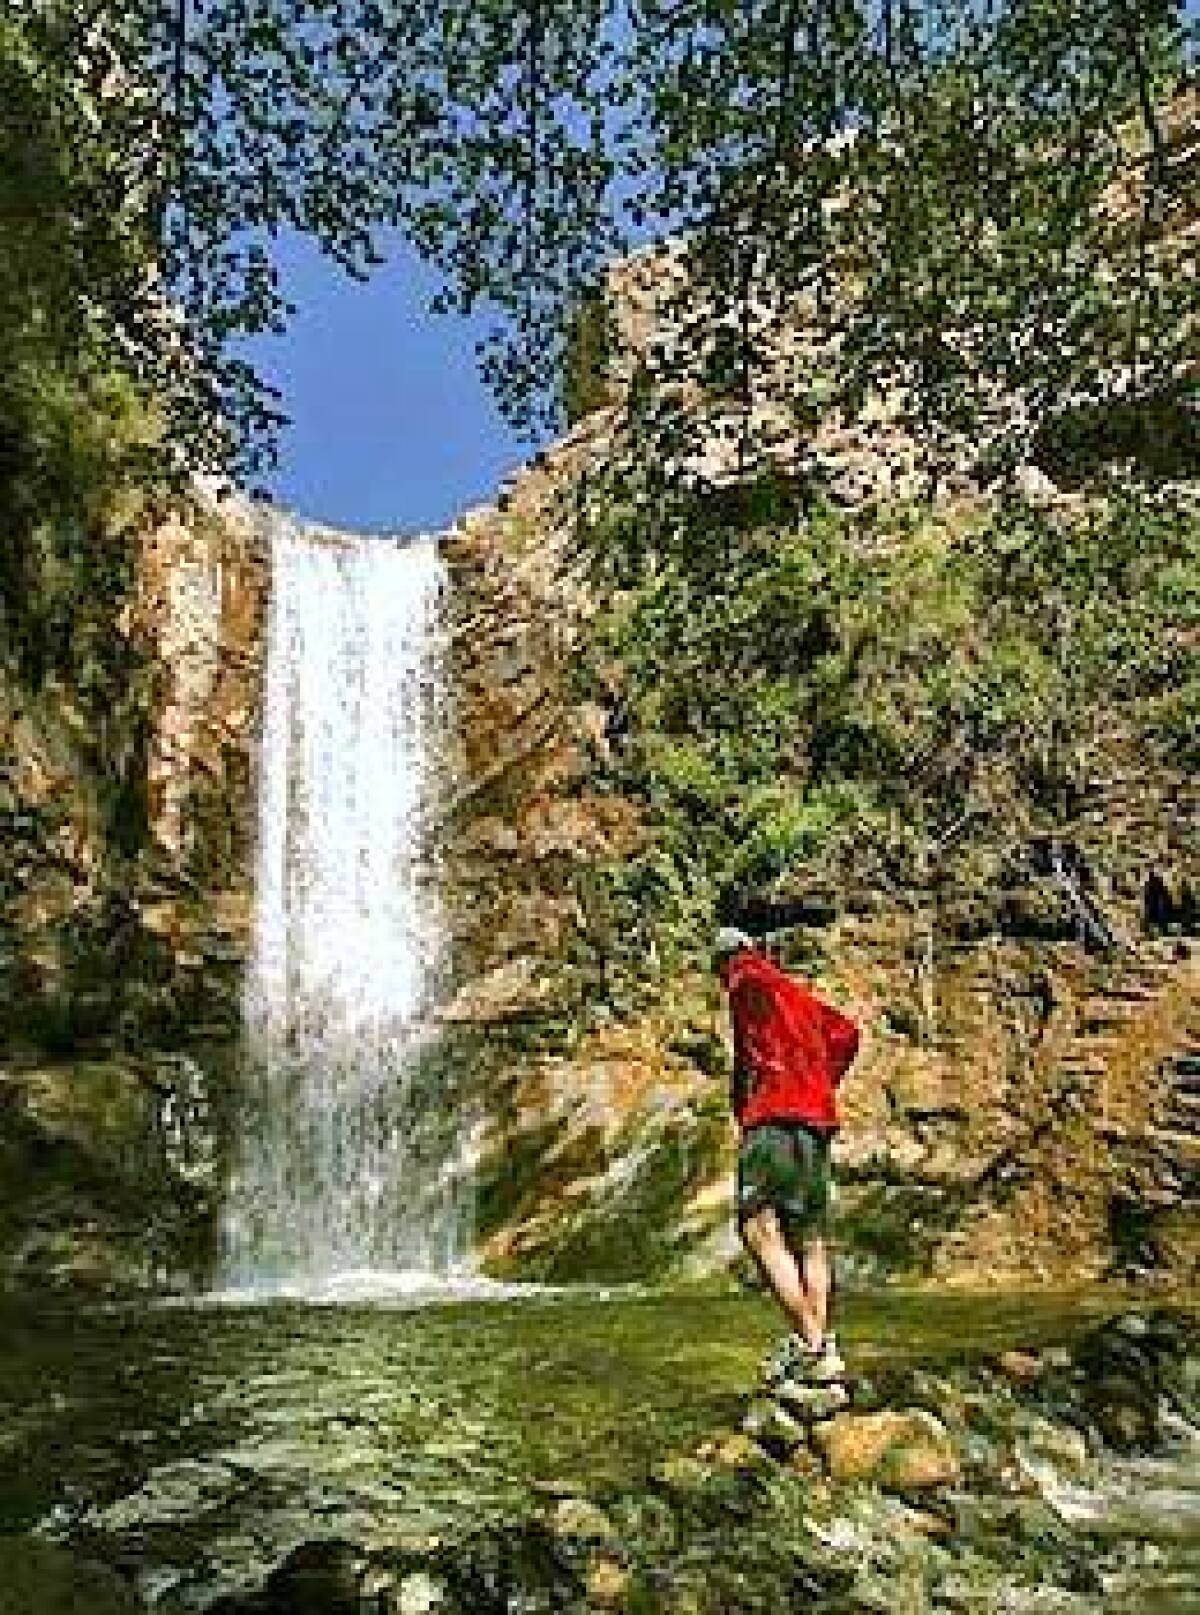 Trail Canyon Falls is an easy to reach 40- to 50-foot curtain pouring like silver over a ledge in Lower Big Tujunga Canyon.